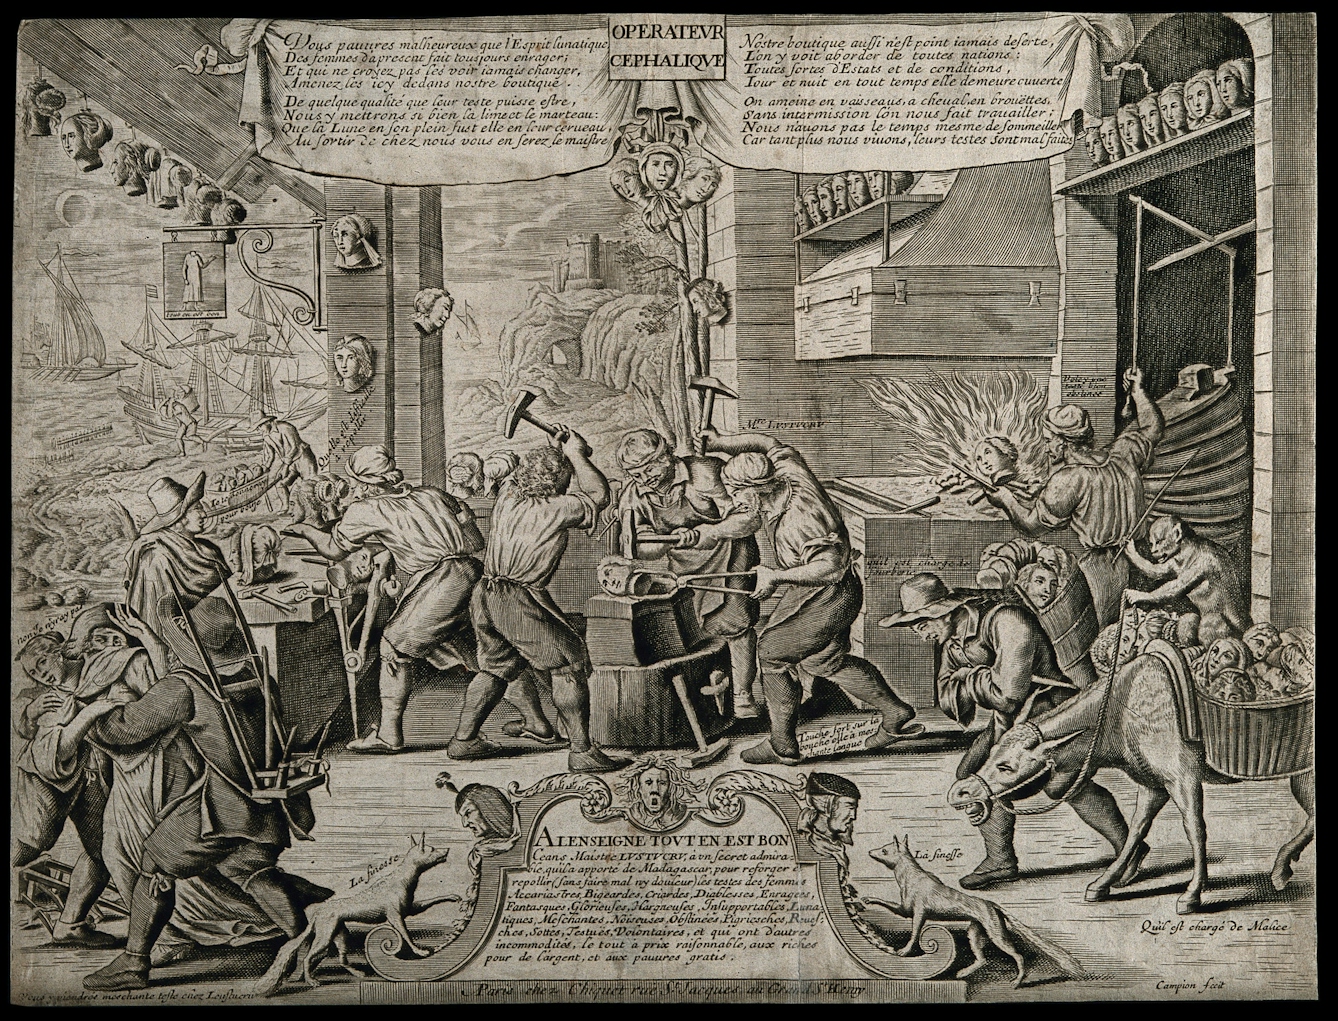 Black and white illustration showing men hard at work in a forge. They are forging women’s heads.